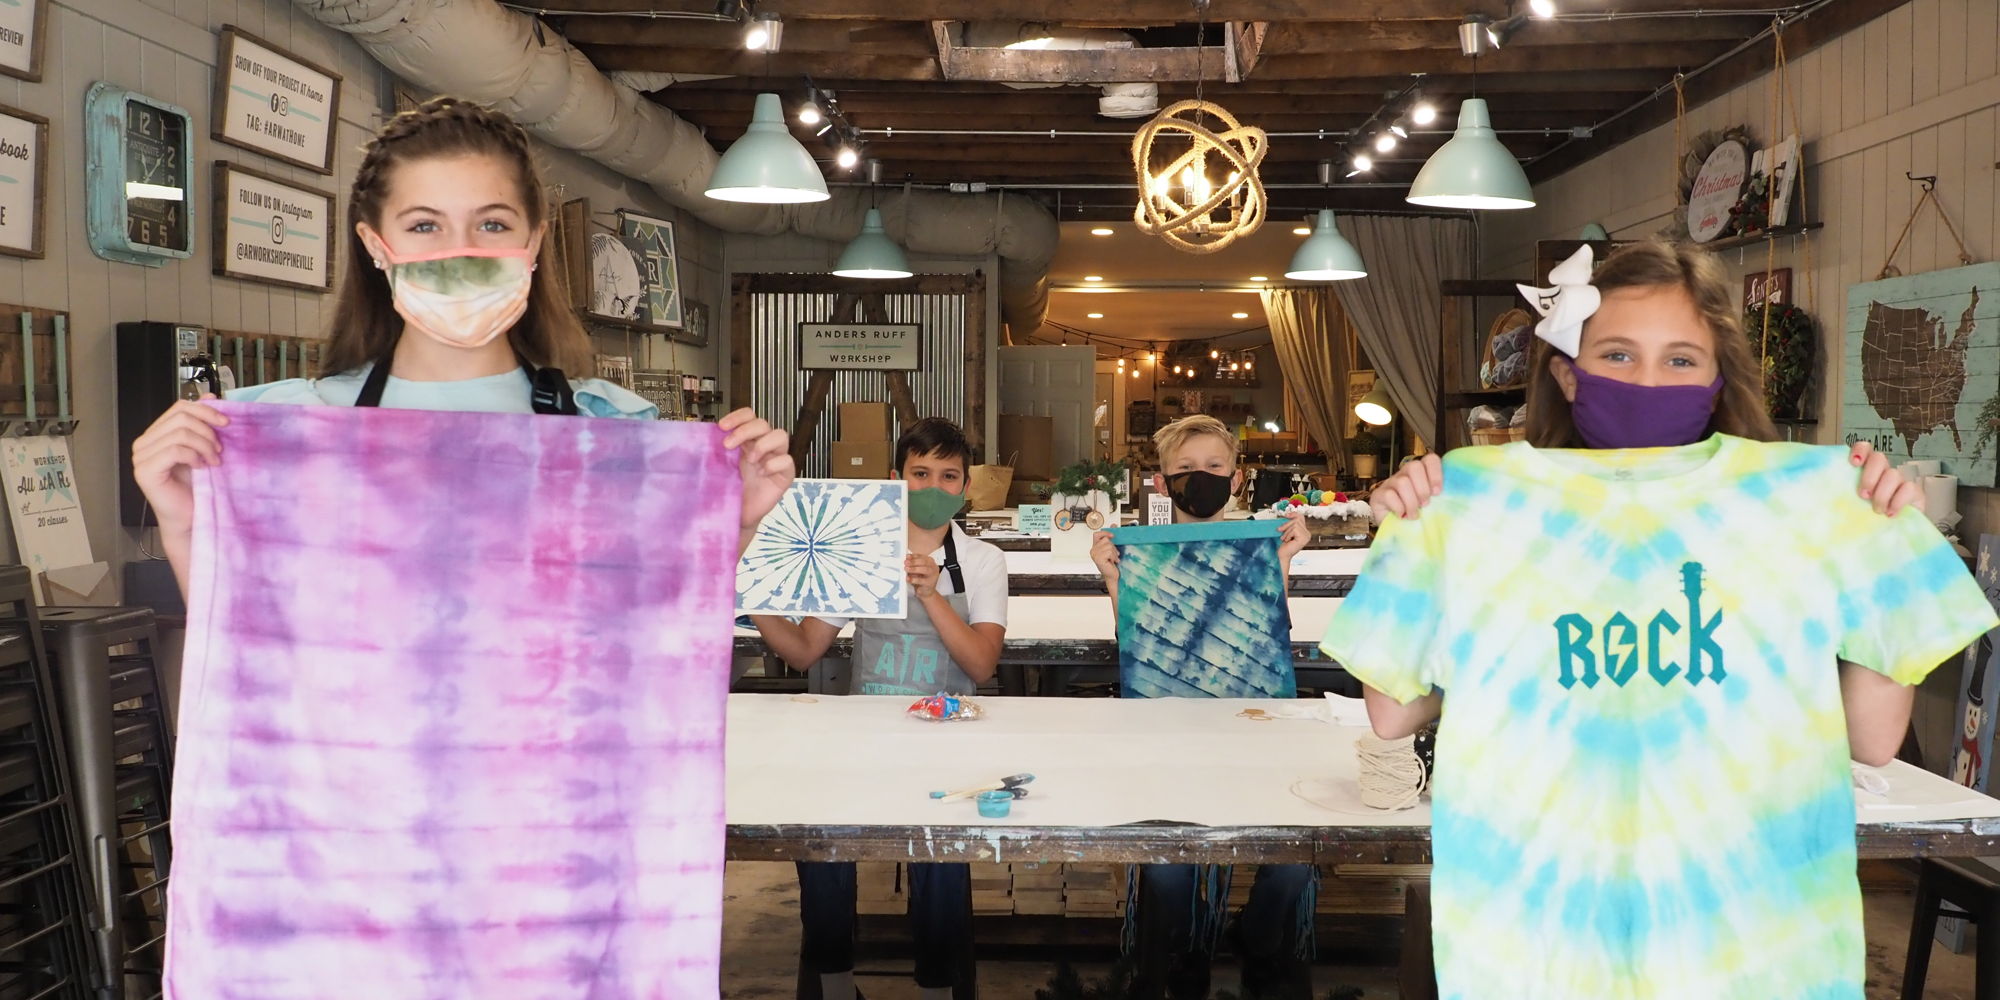 4 DAY SUMMER ART AFTERNOON SESSION - TIE DYE WEEK!! promotional image